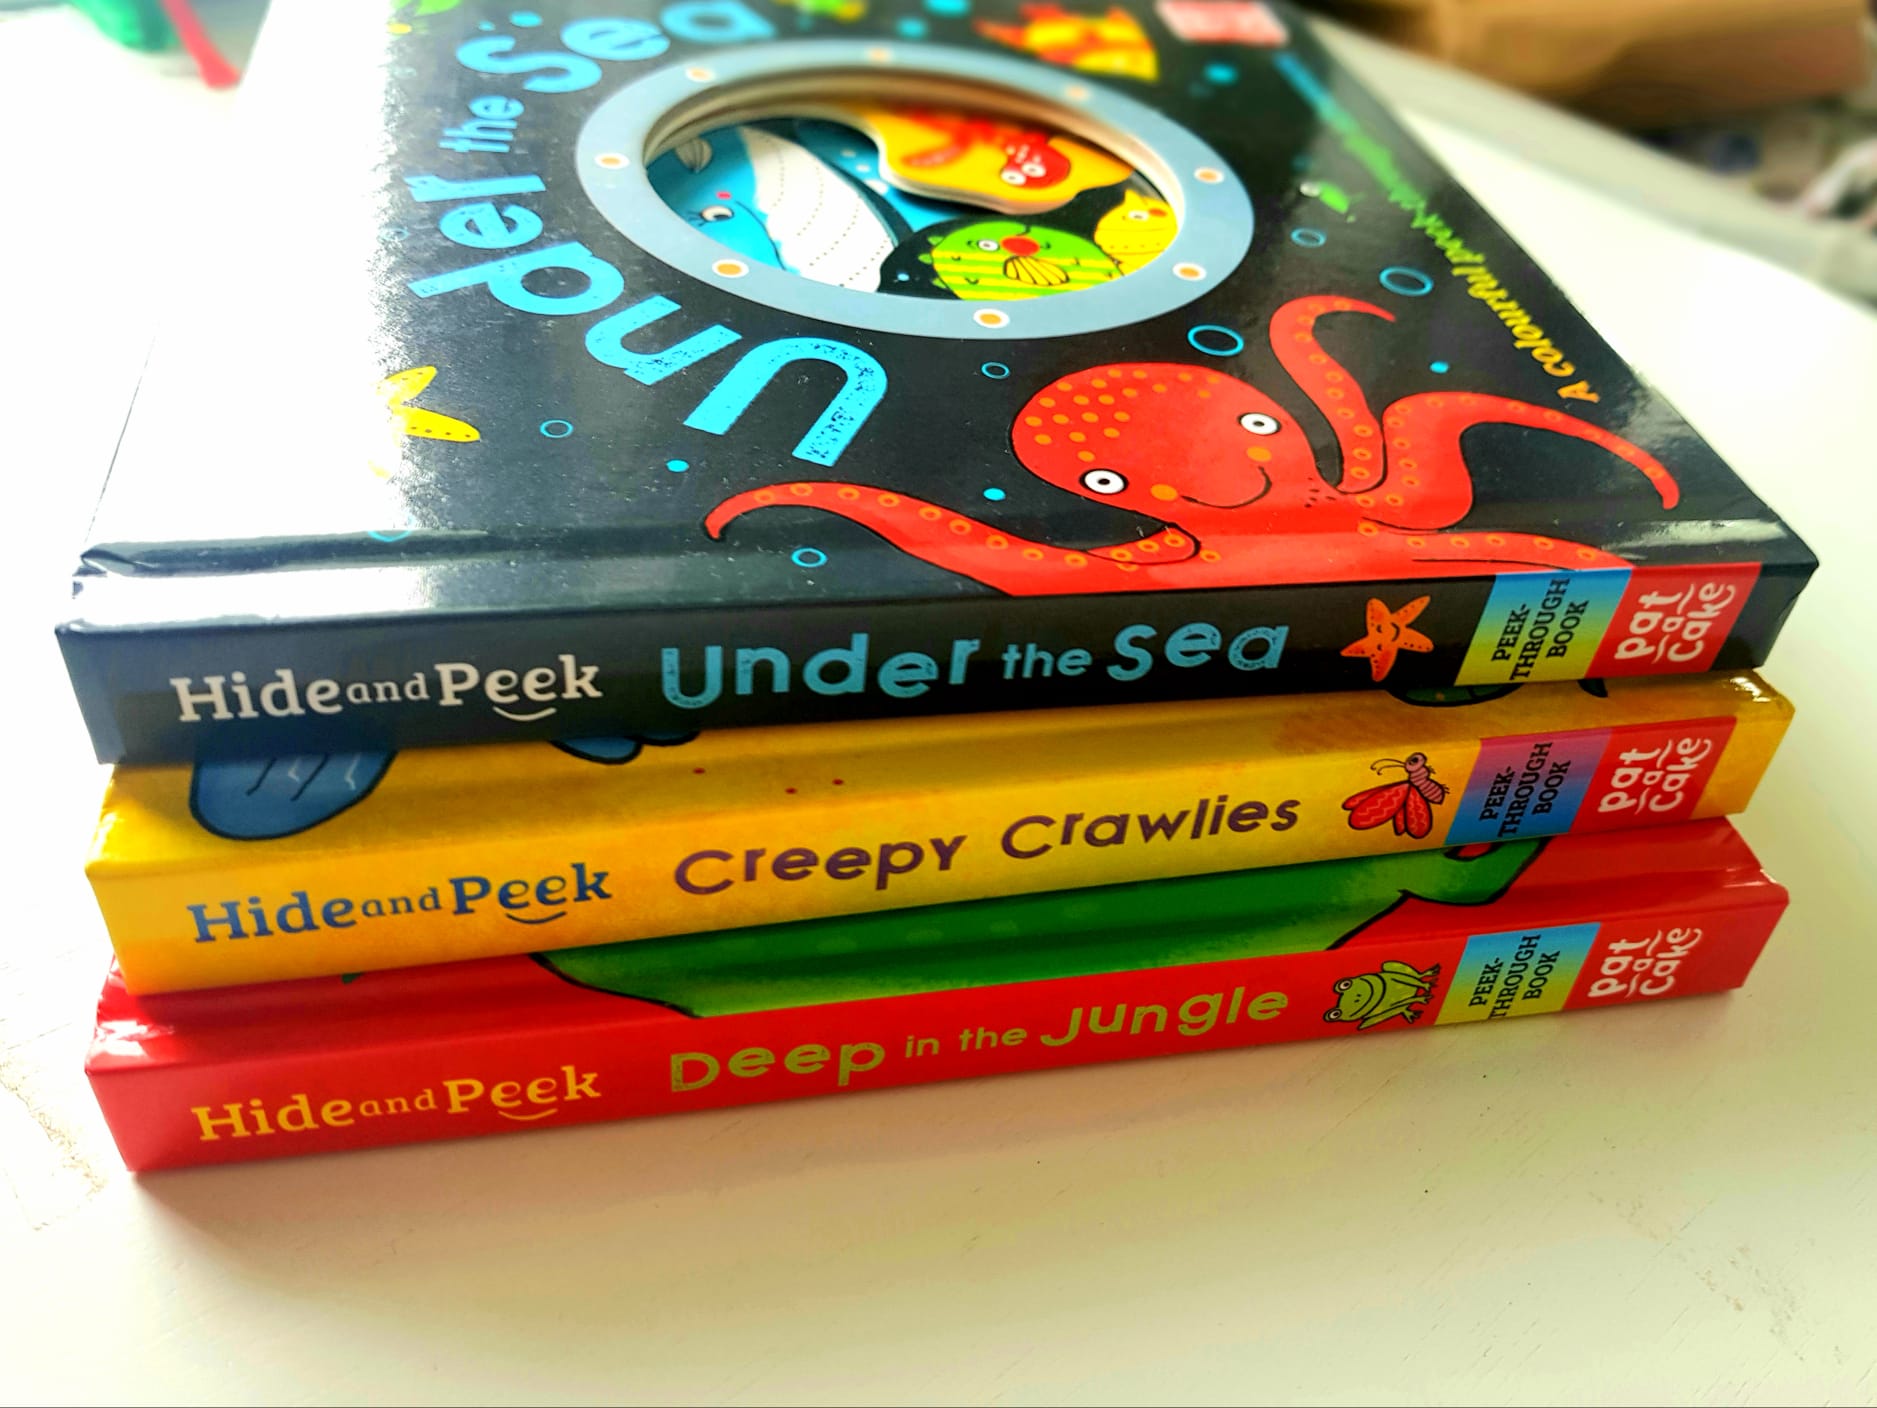 Hide and Peek: Under the Sea, colourful, interactive board book